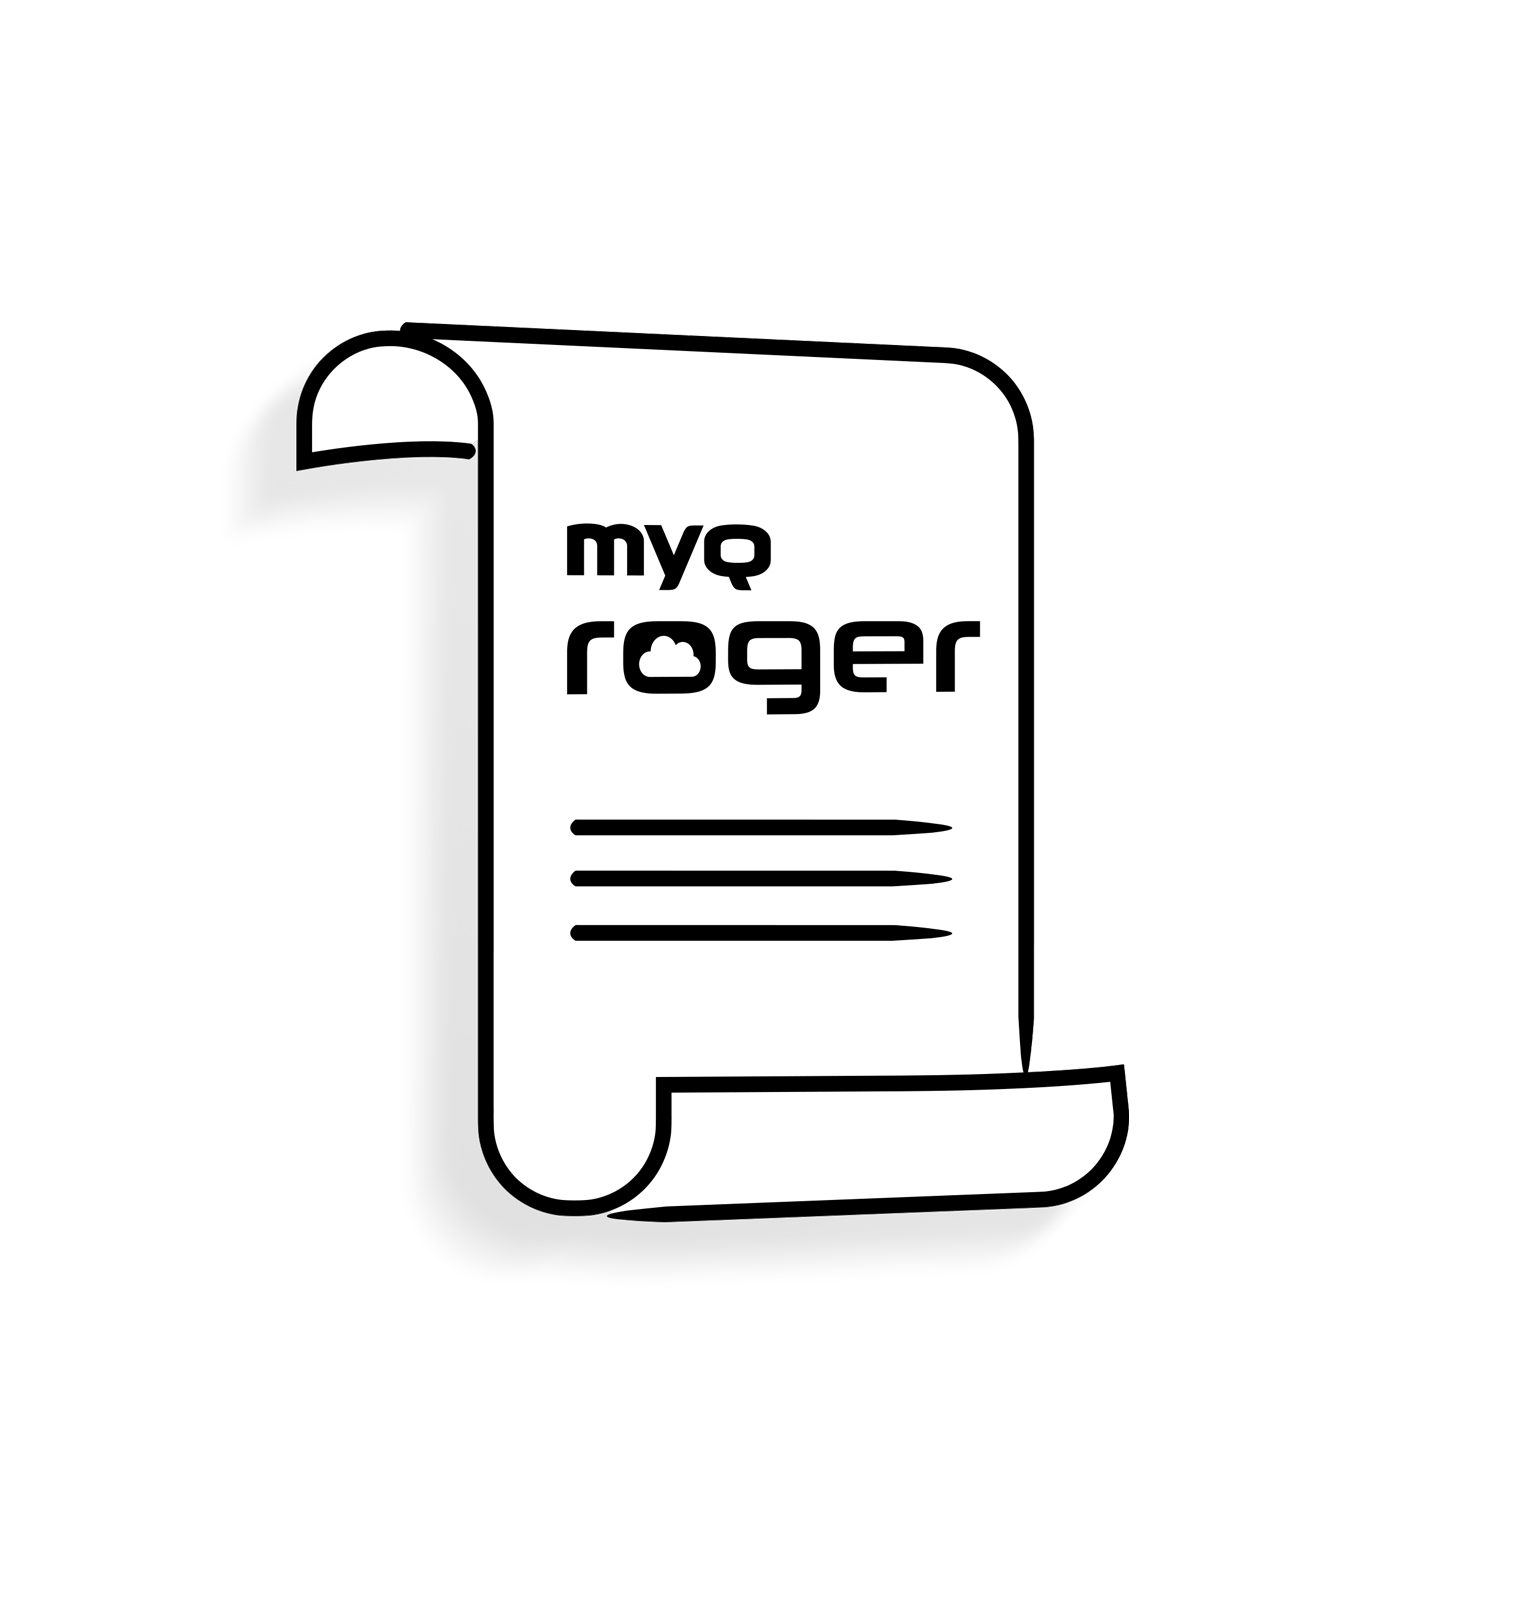 MyQ Roger 関連ドキュメント